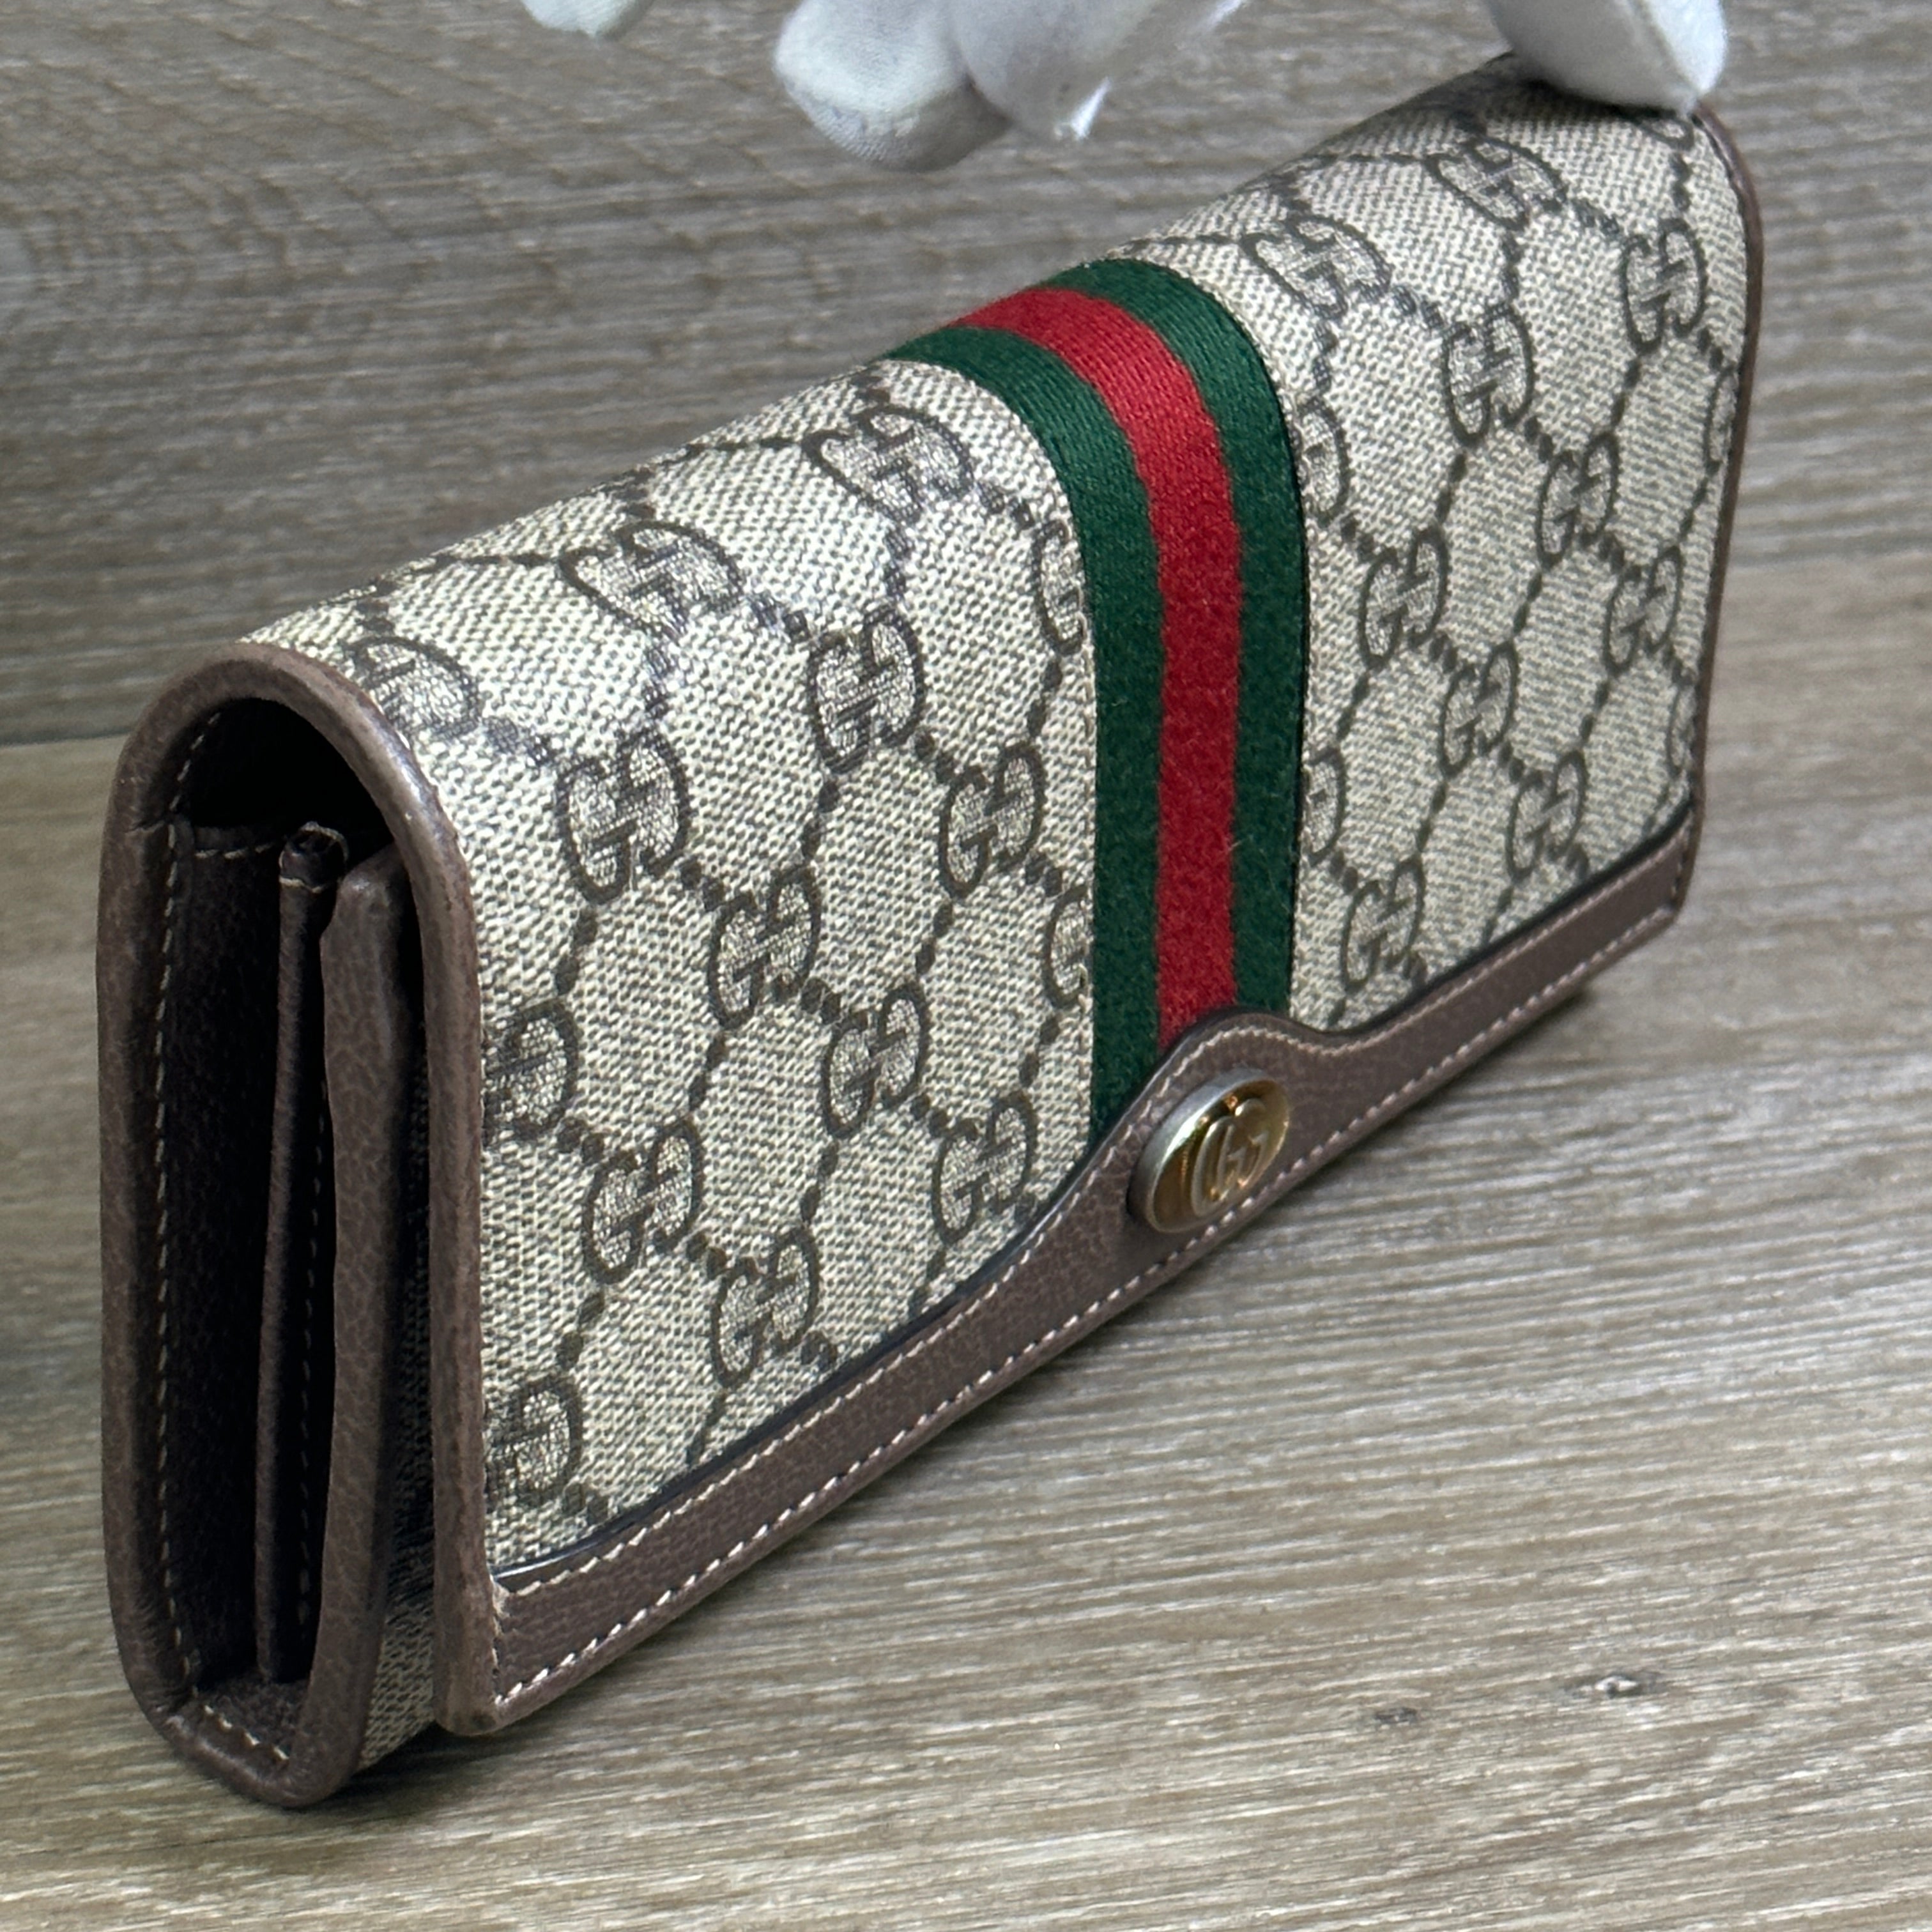 GUCCI Ophidia Gg Supreme Chain Wallet for Women